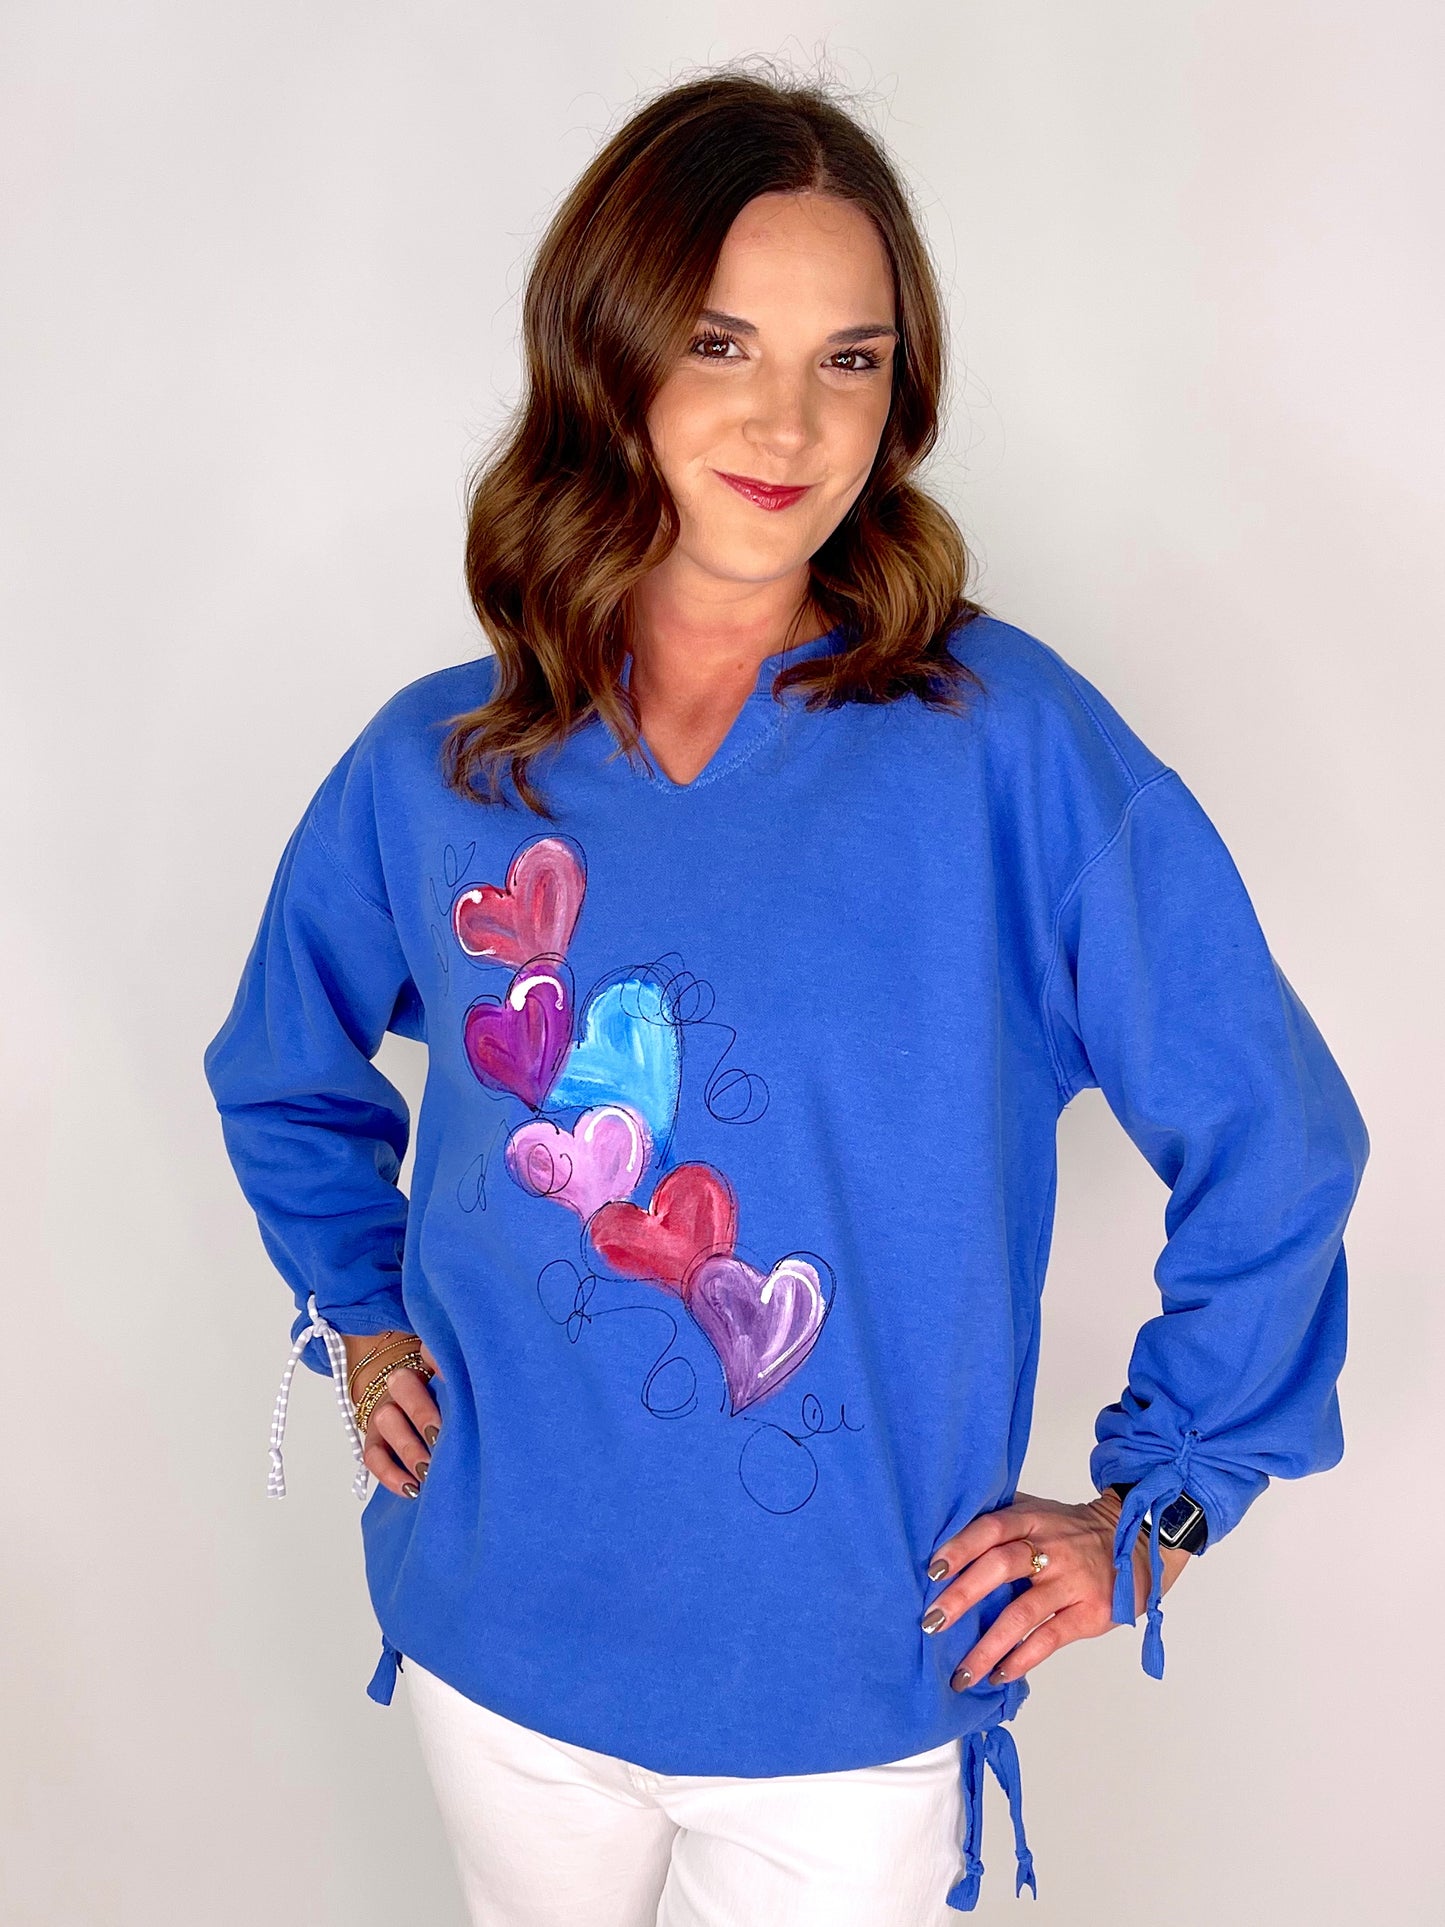 Crazy in Love Sweatshirt-Sweatshirt-Kunky's-The Village Shoppe, Women’s Fashion Boutique, Shop Online and In Store - Located in Muscle Shoals, AL.